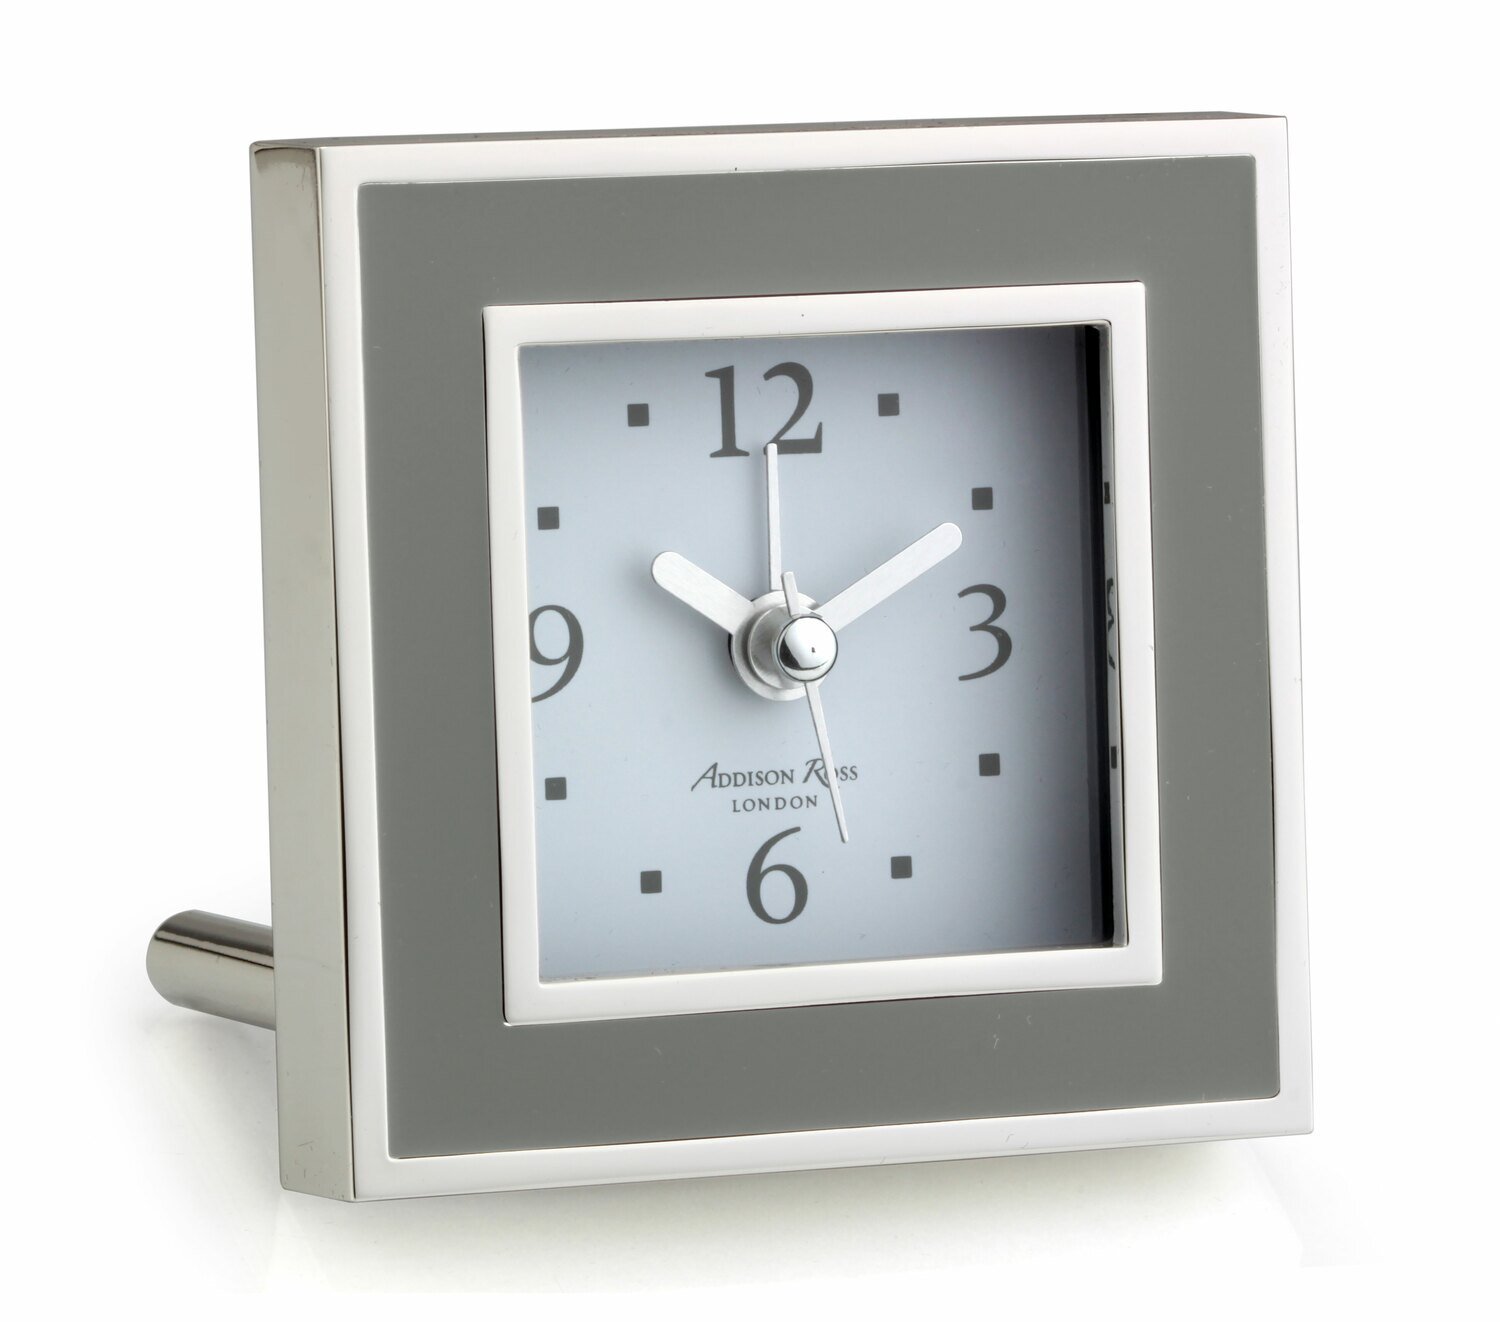 Addison Ross Taupe Enamel Square Alarm Clock 3 x 3 Inch Silver-plated FR1001